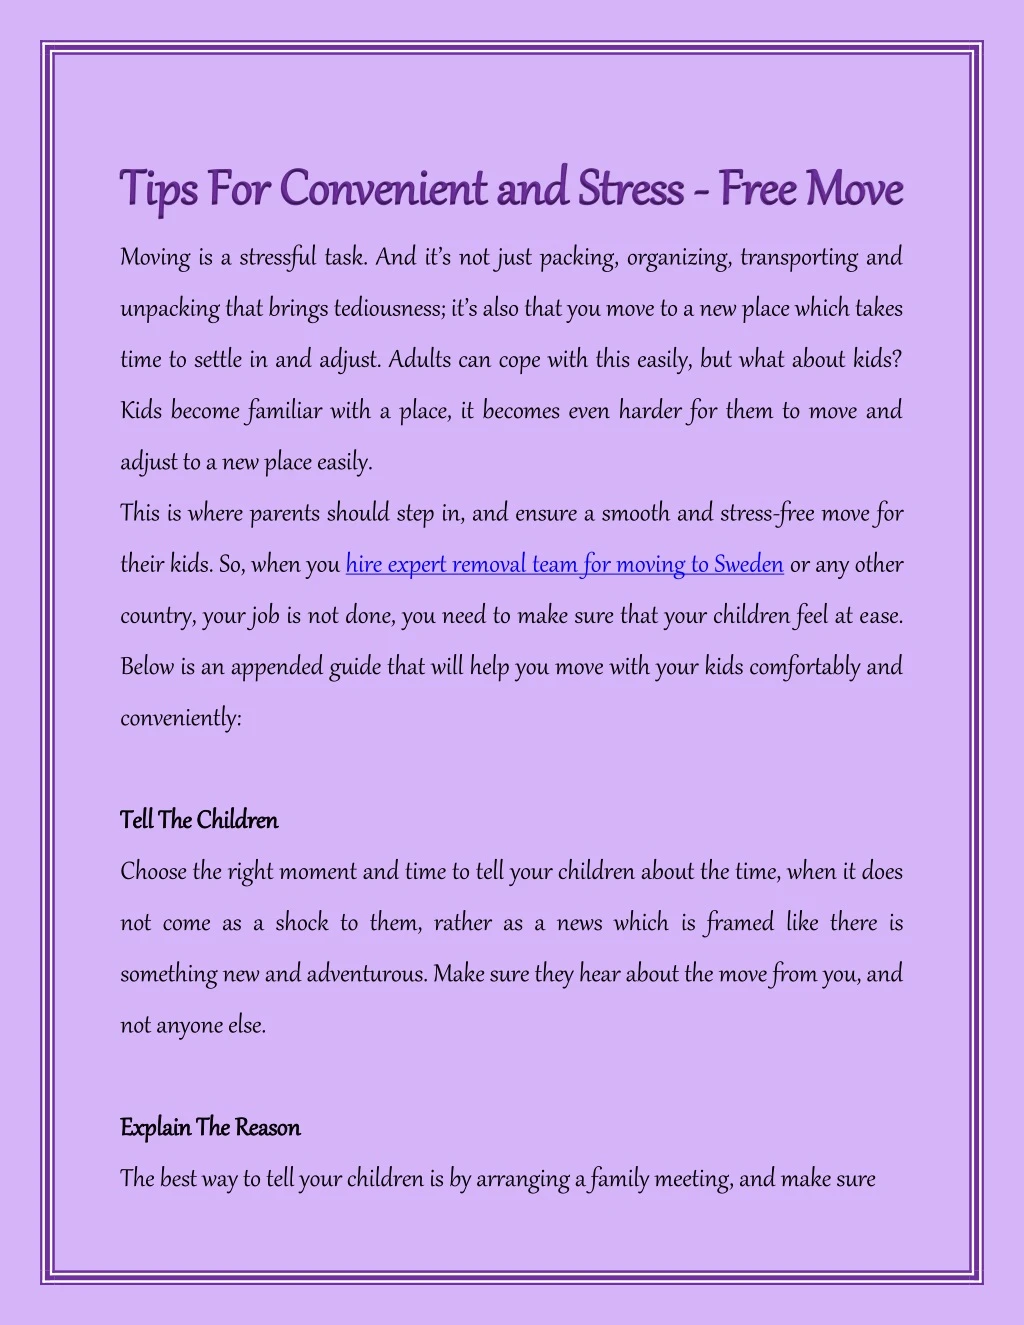 tips tips for convenient for convenient and